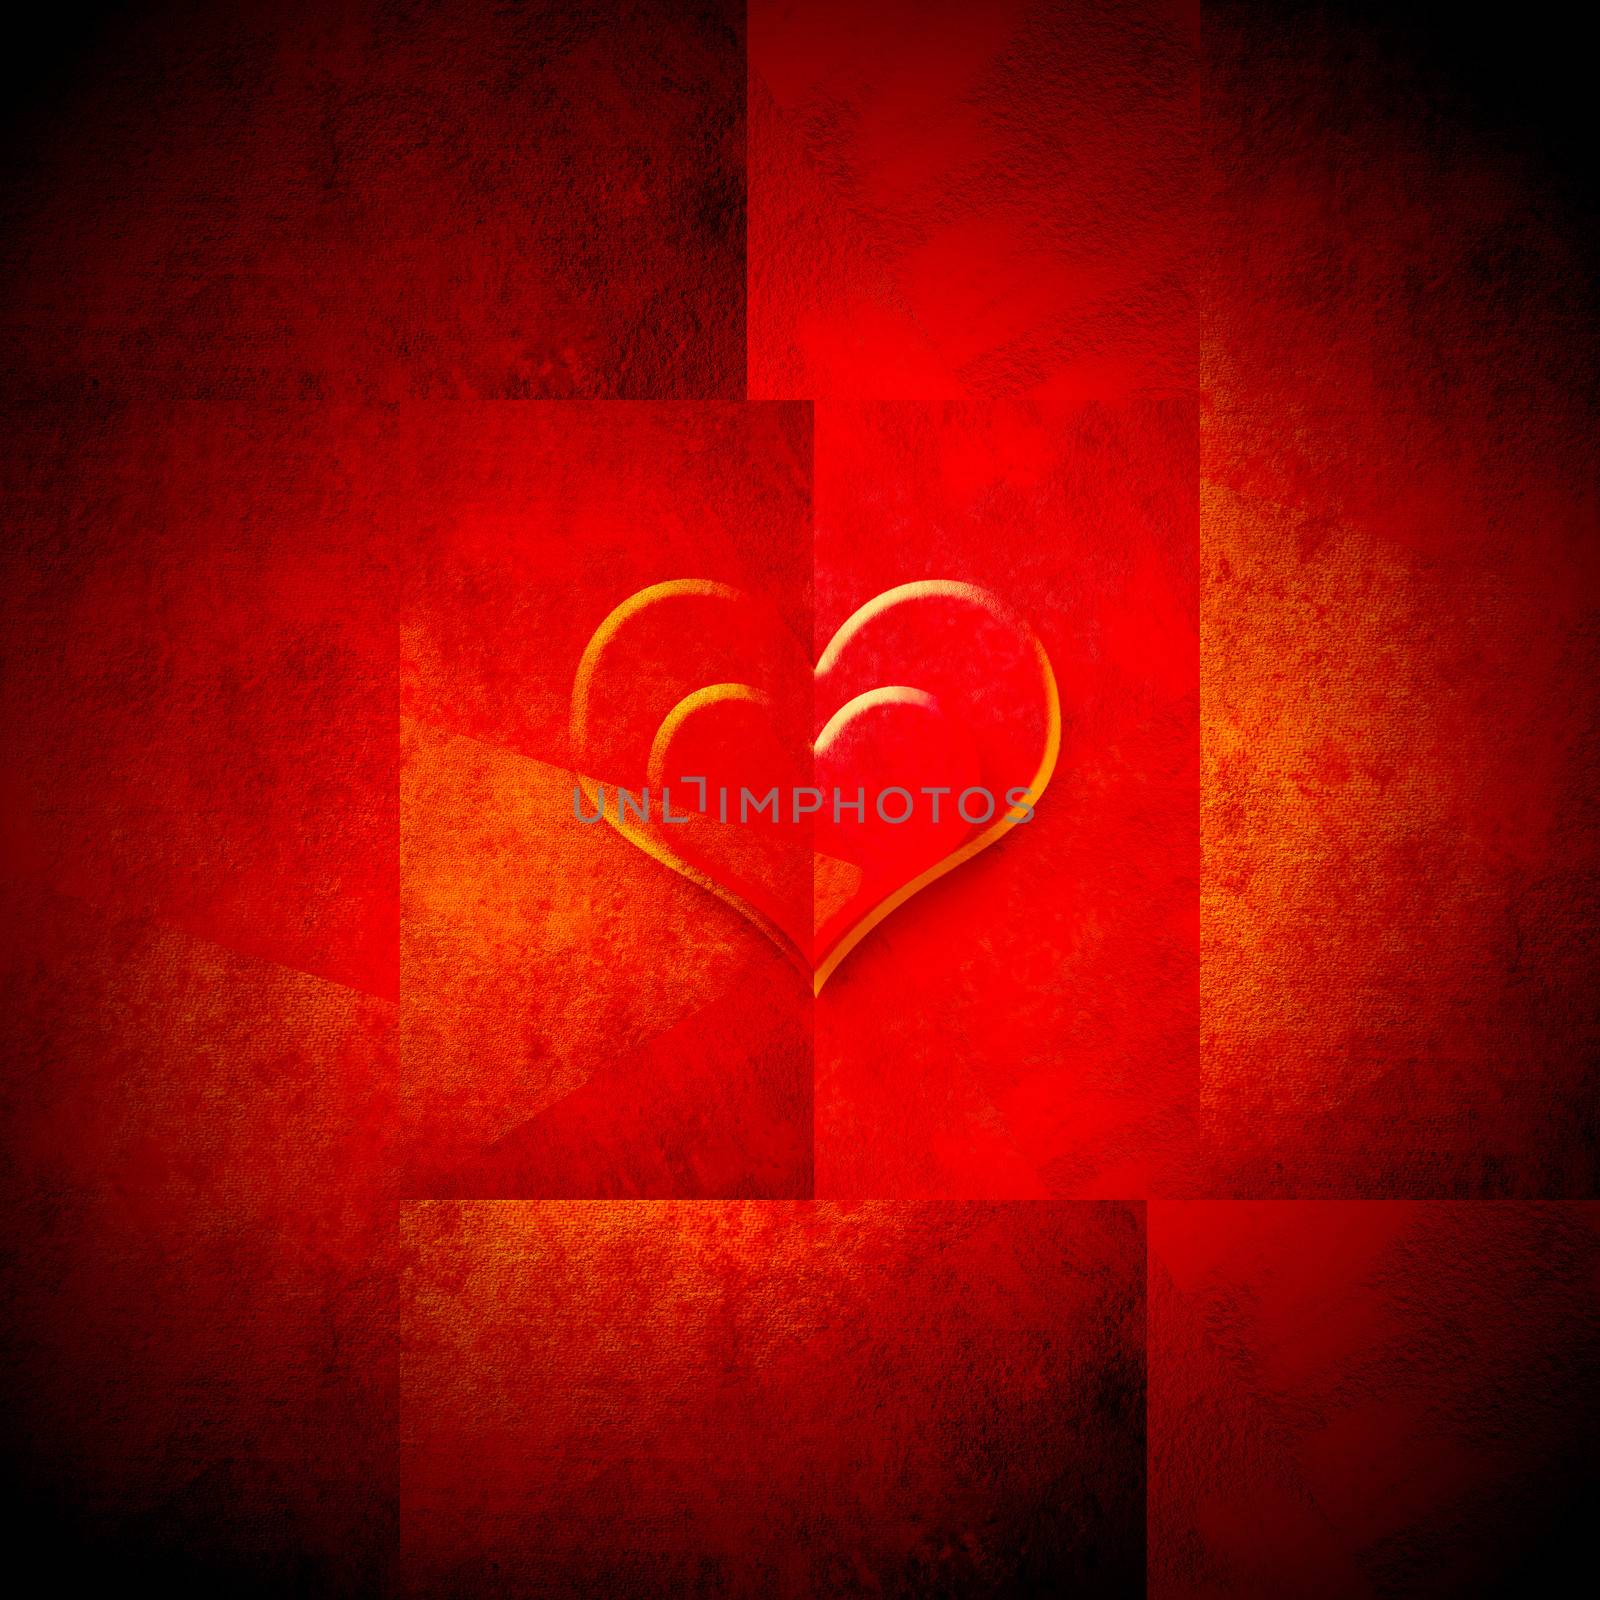 background valentines day two transparent hearts into each other in bright red background